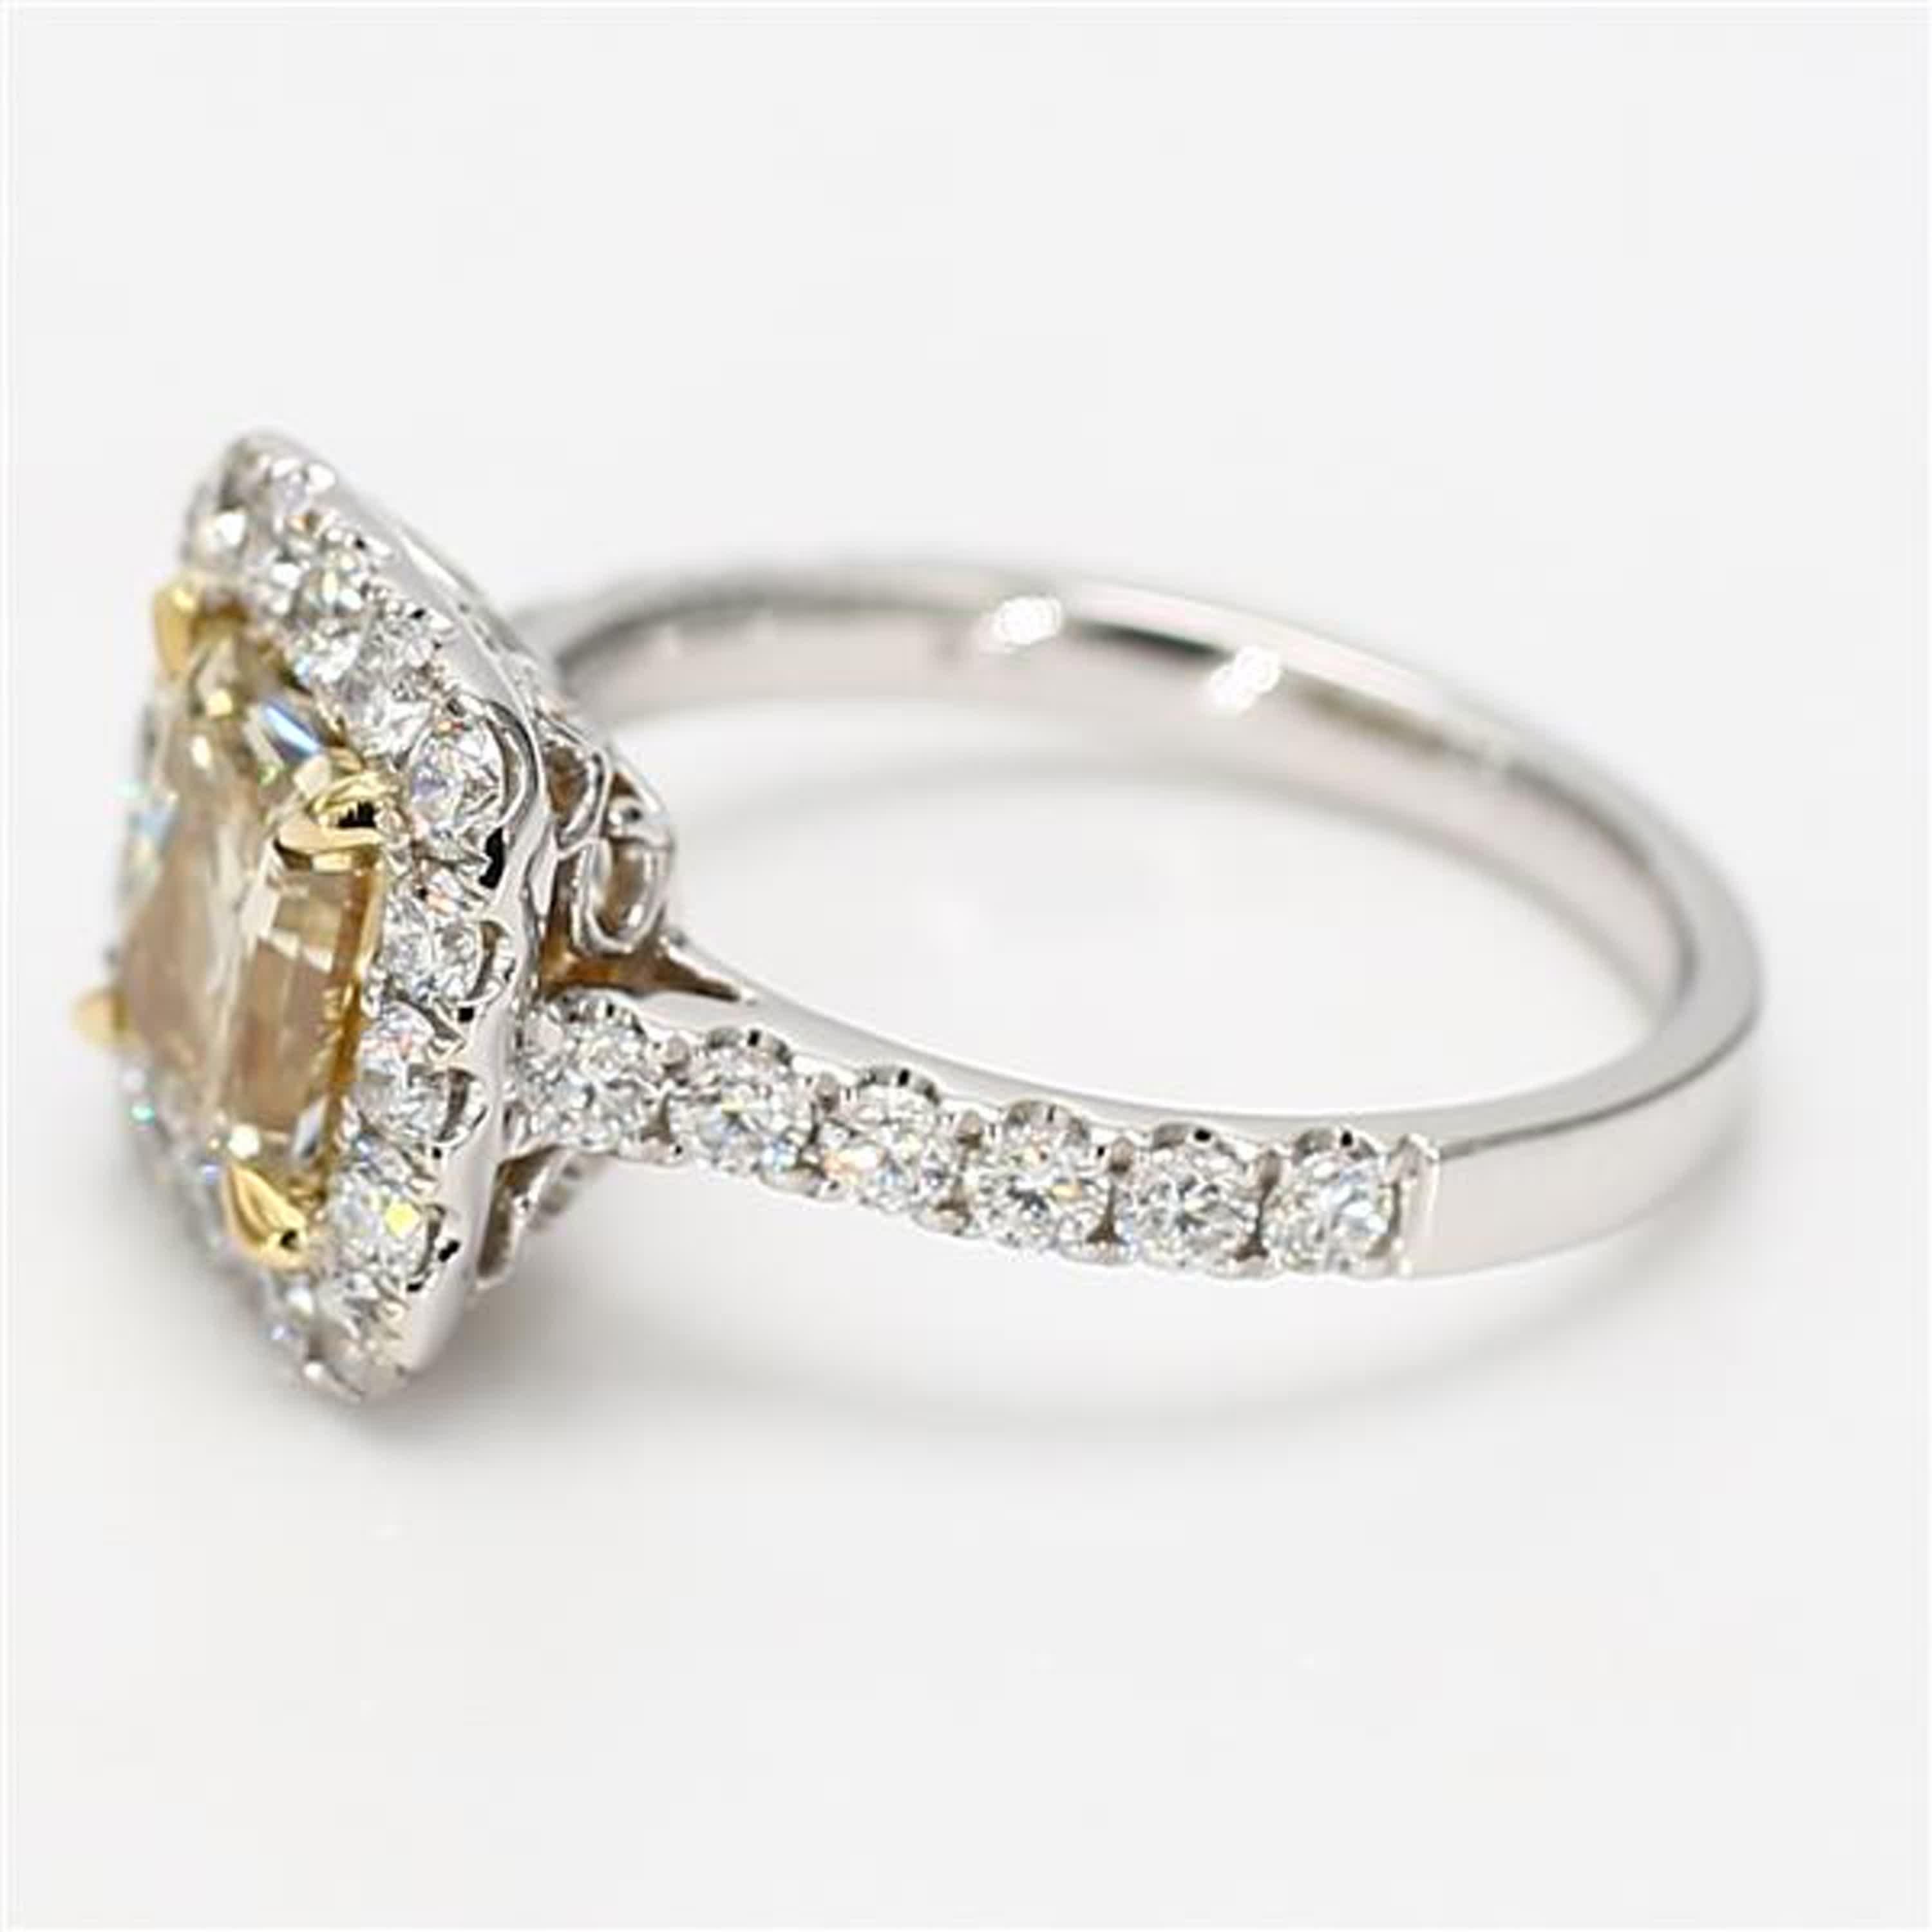 RareGemWorld's classic GIA certified diamond ring. Mounted in a beautiful 18K Yellow and White Gold setting with a natural radiant cut yellow diamond. The yellow diamond is surrounded by round natural white diamond melee. This ring is guaranteed to